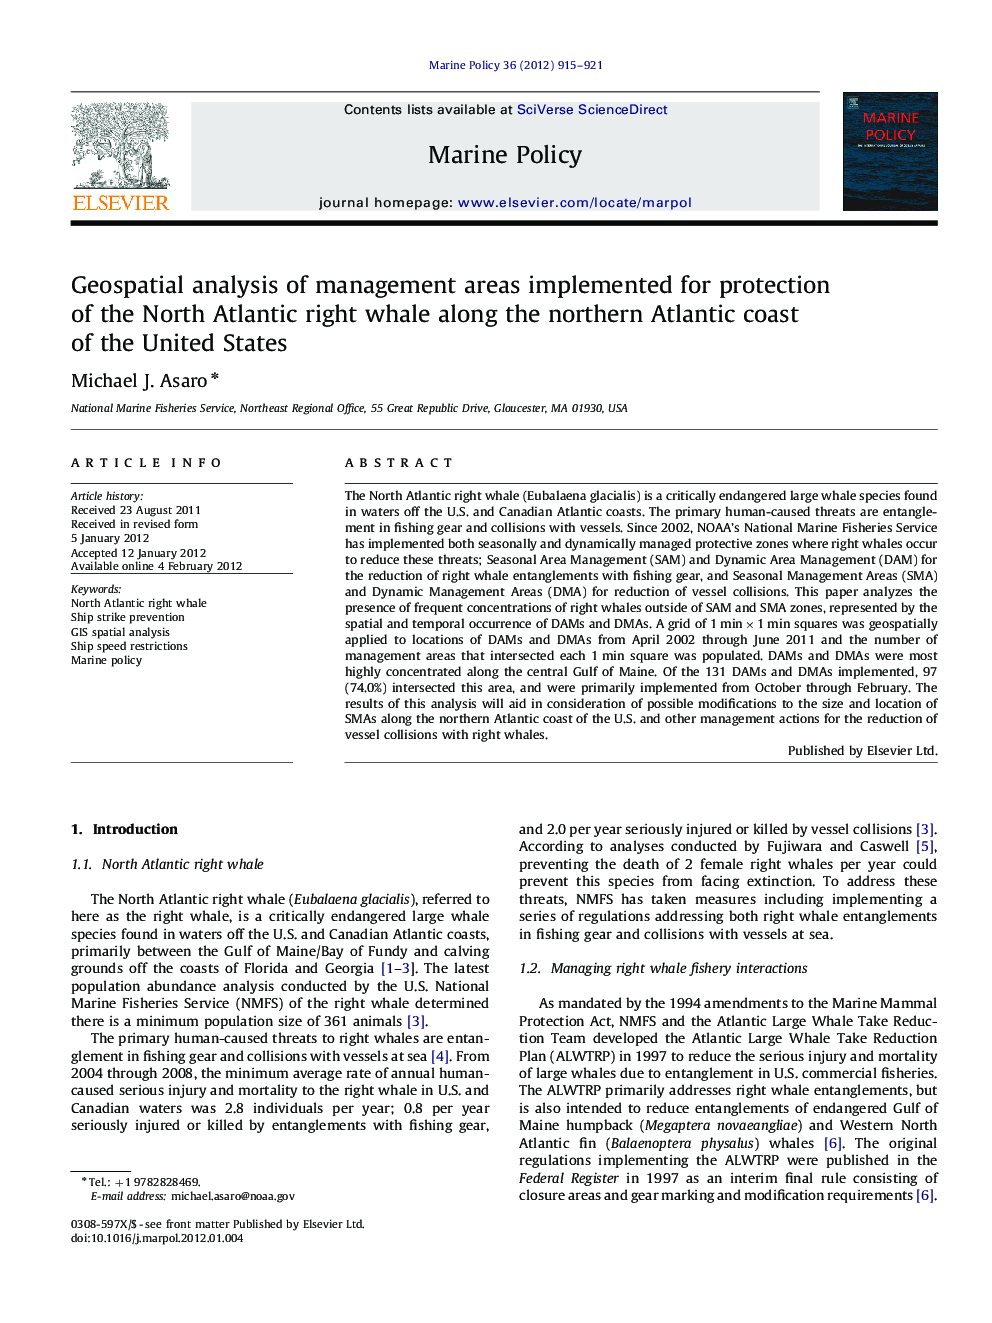 Geospatial analysis of management areas implemented for protection of the North Atlantic right whale along the northern Atlantic coast of the United States